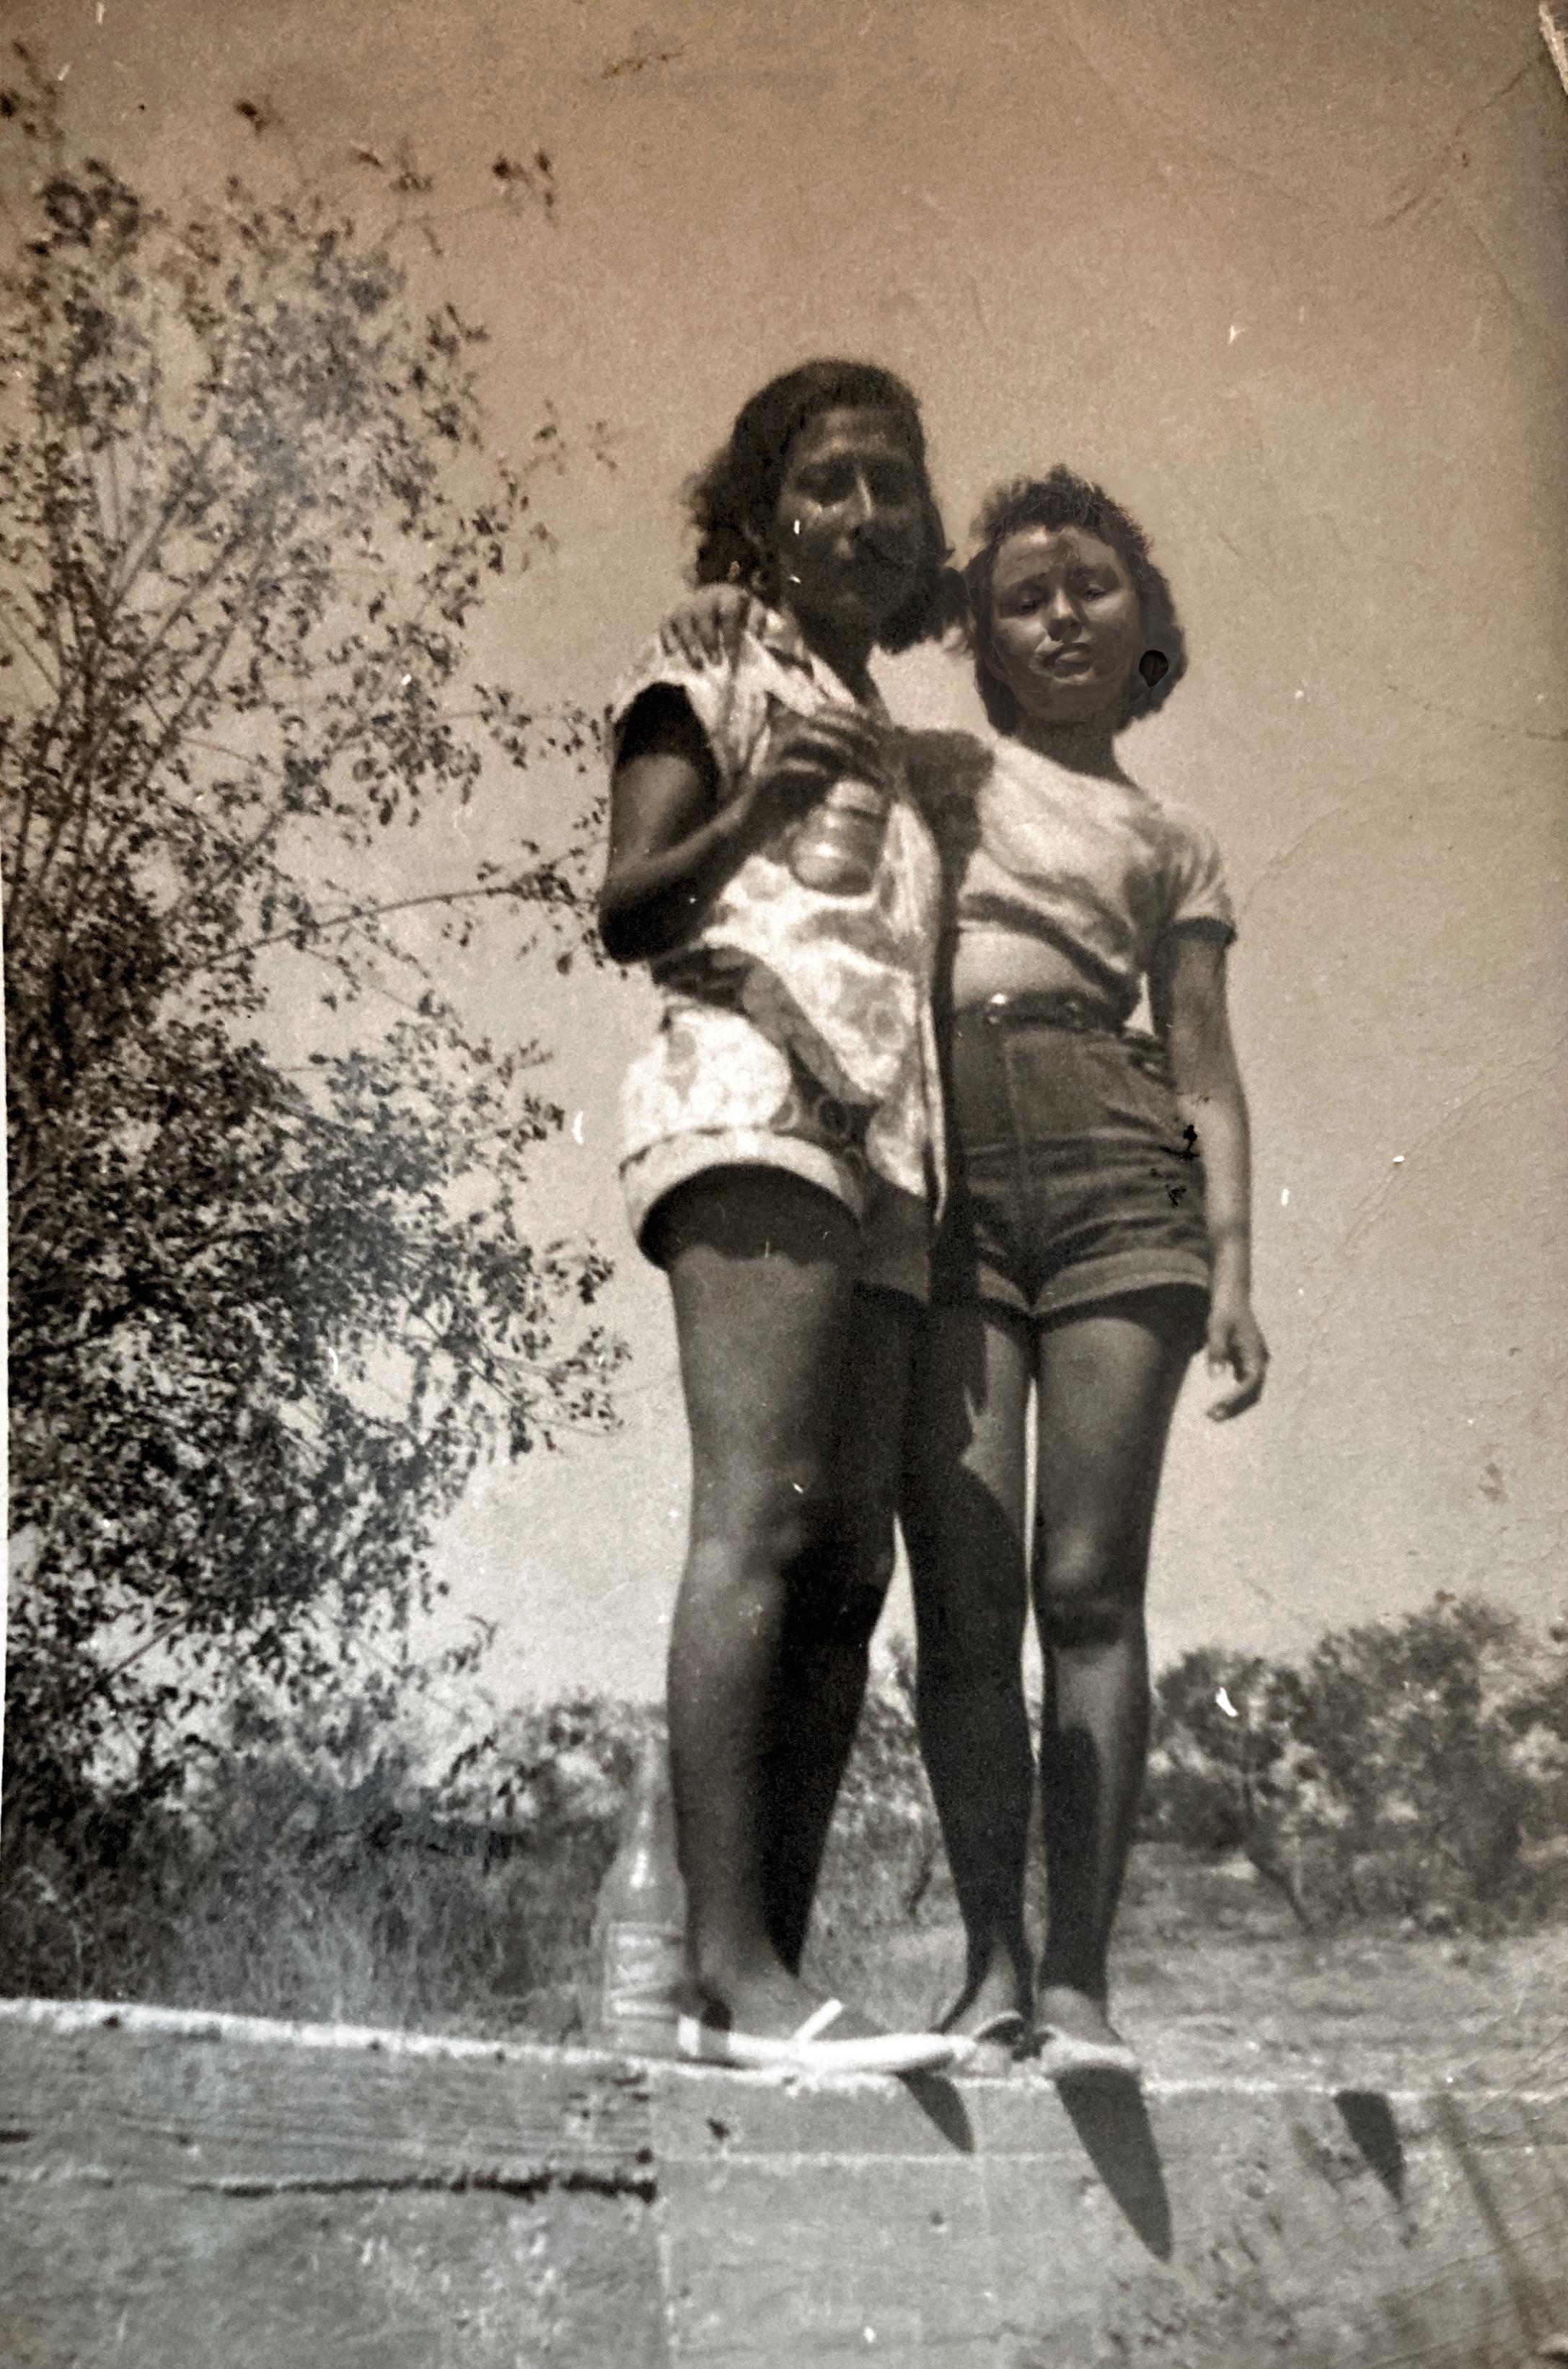 My Mom and Her Best Friend. Just posing for a photo in 1952!